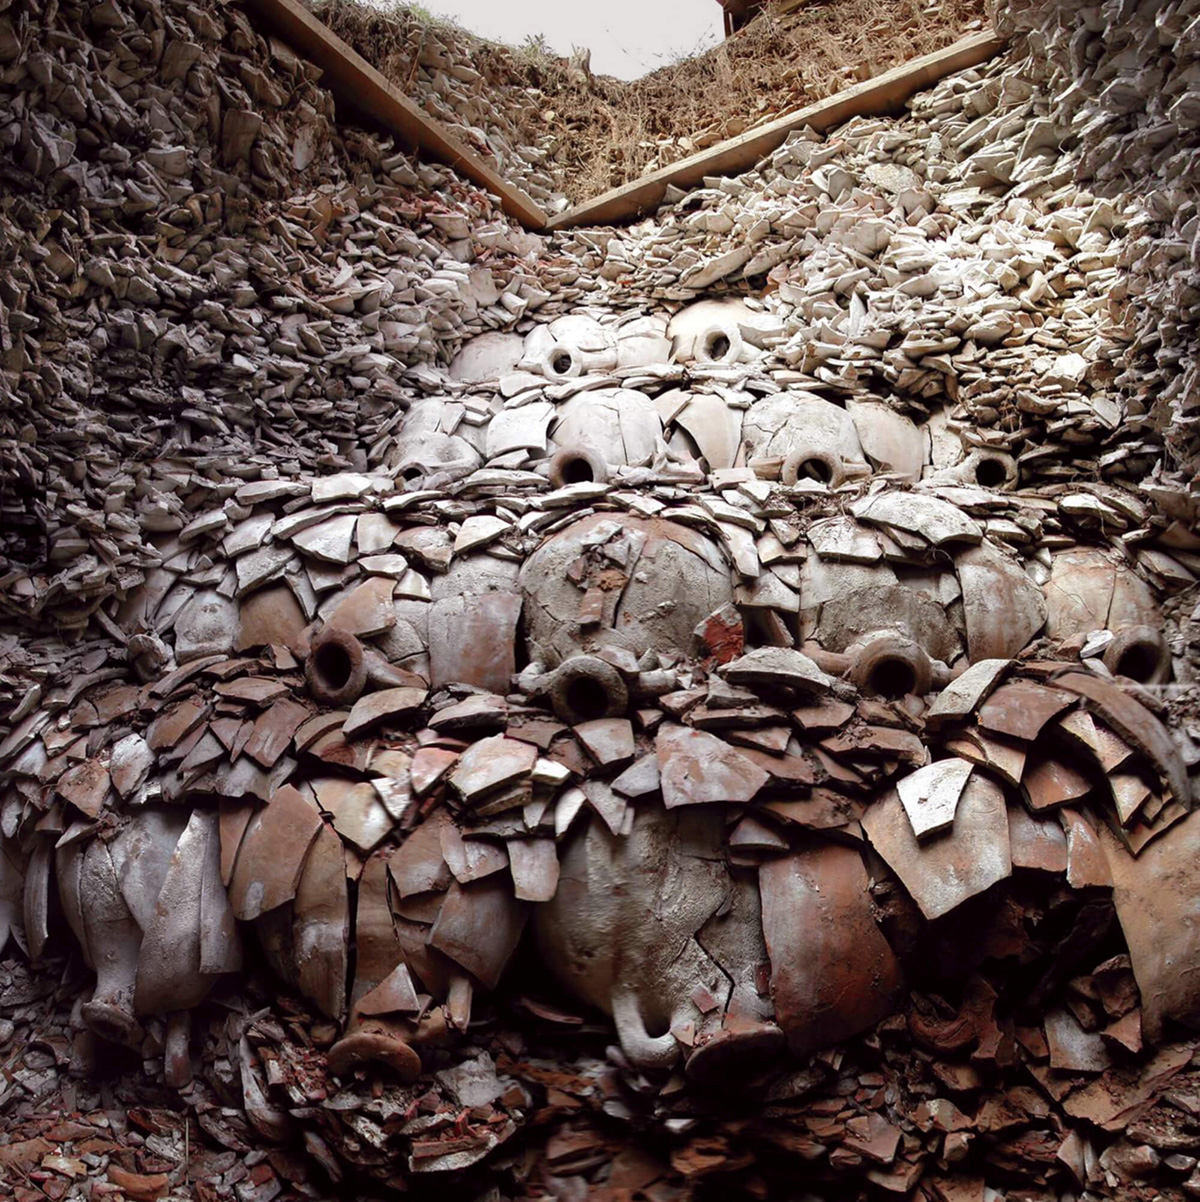 Broken olive oil amphorae at Rome’s Monte Testaccio, “The Hill of Shards.”